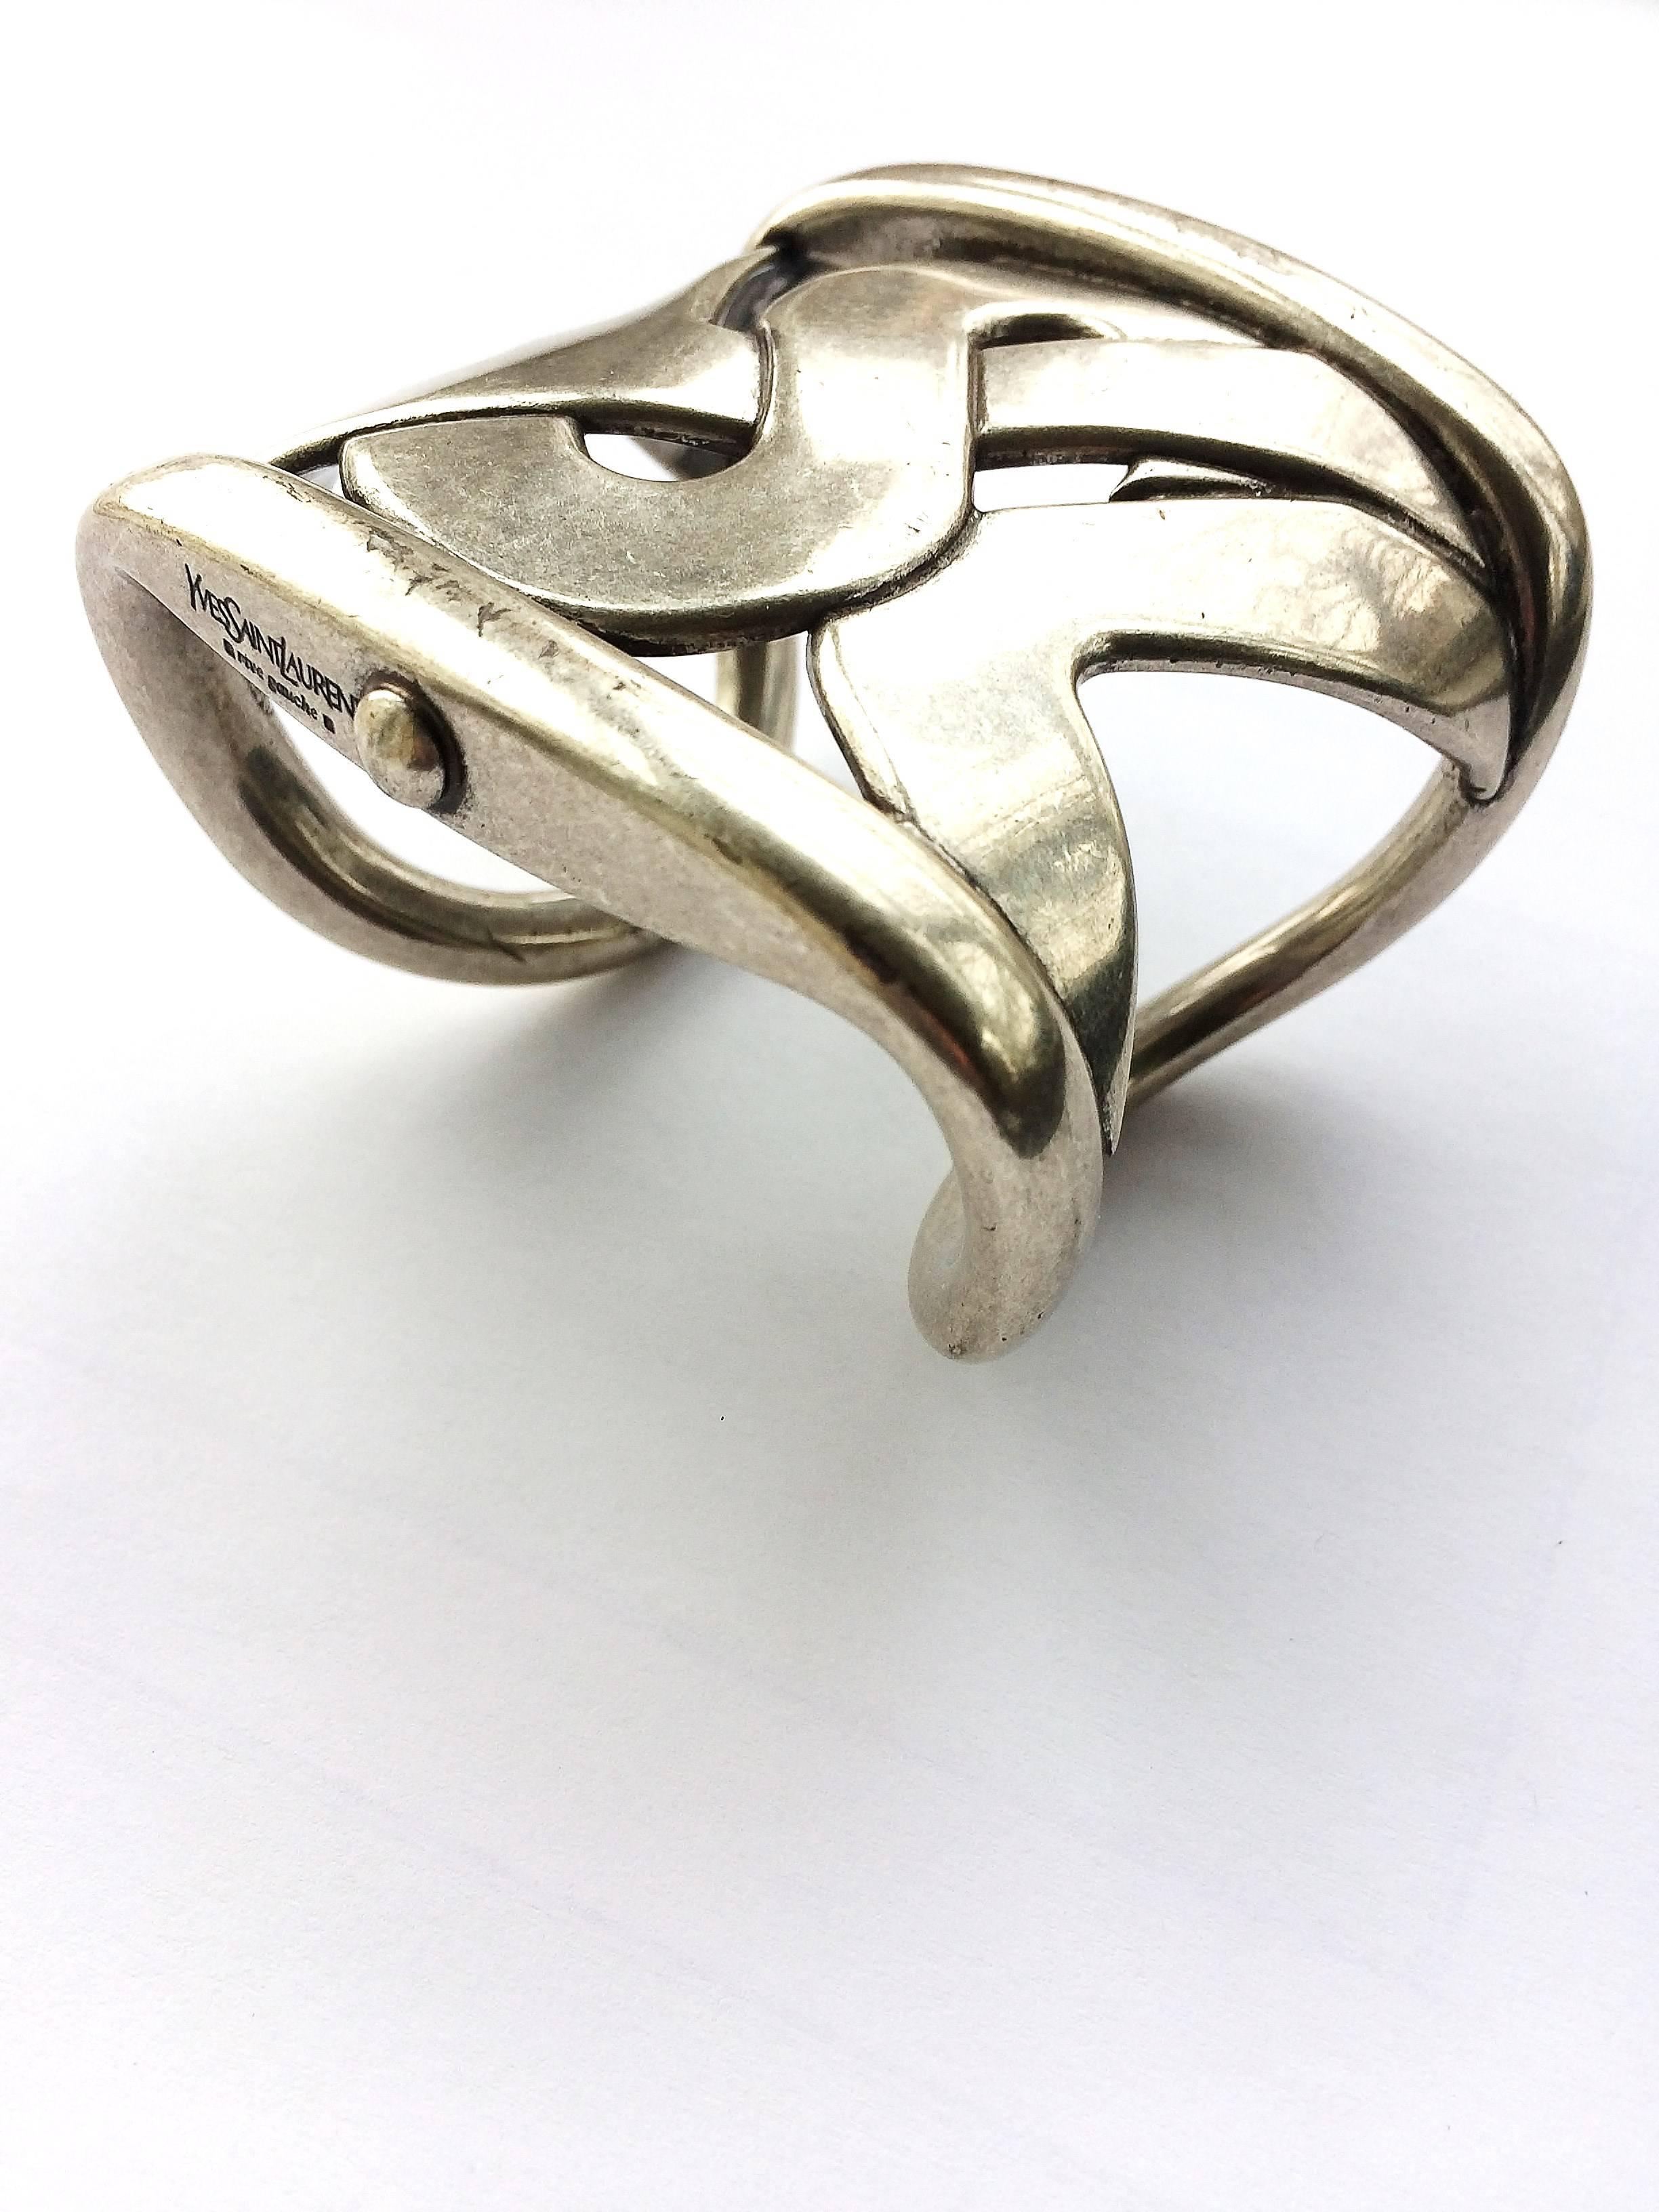 Women's A statement logo silver plated cuff bangle, Yves Saint Laurent, France,  1980s.